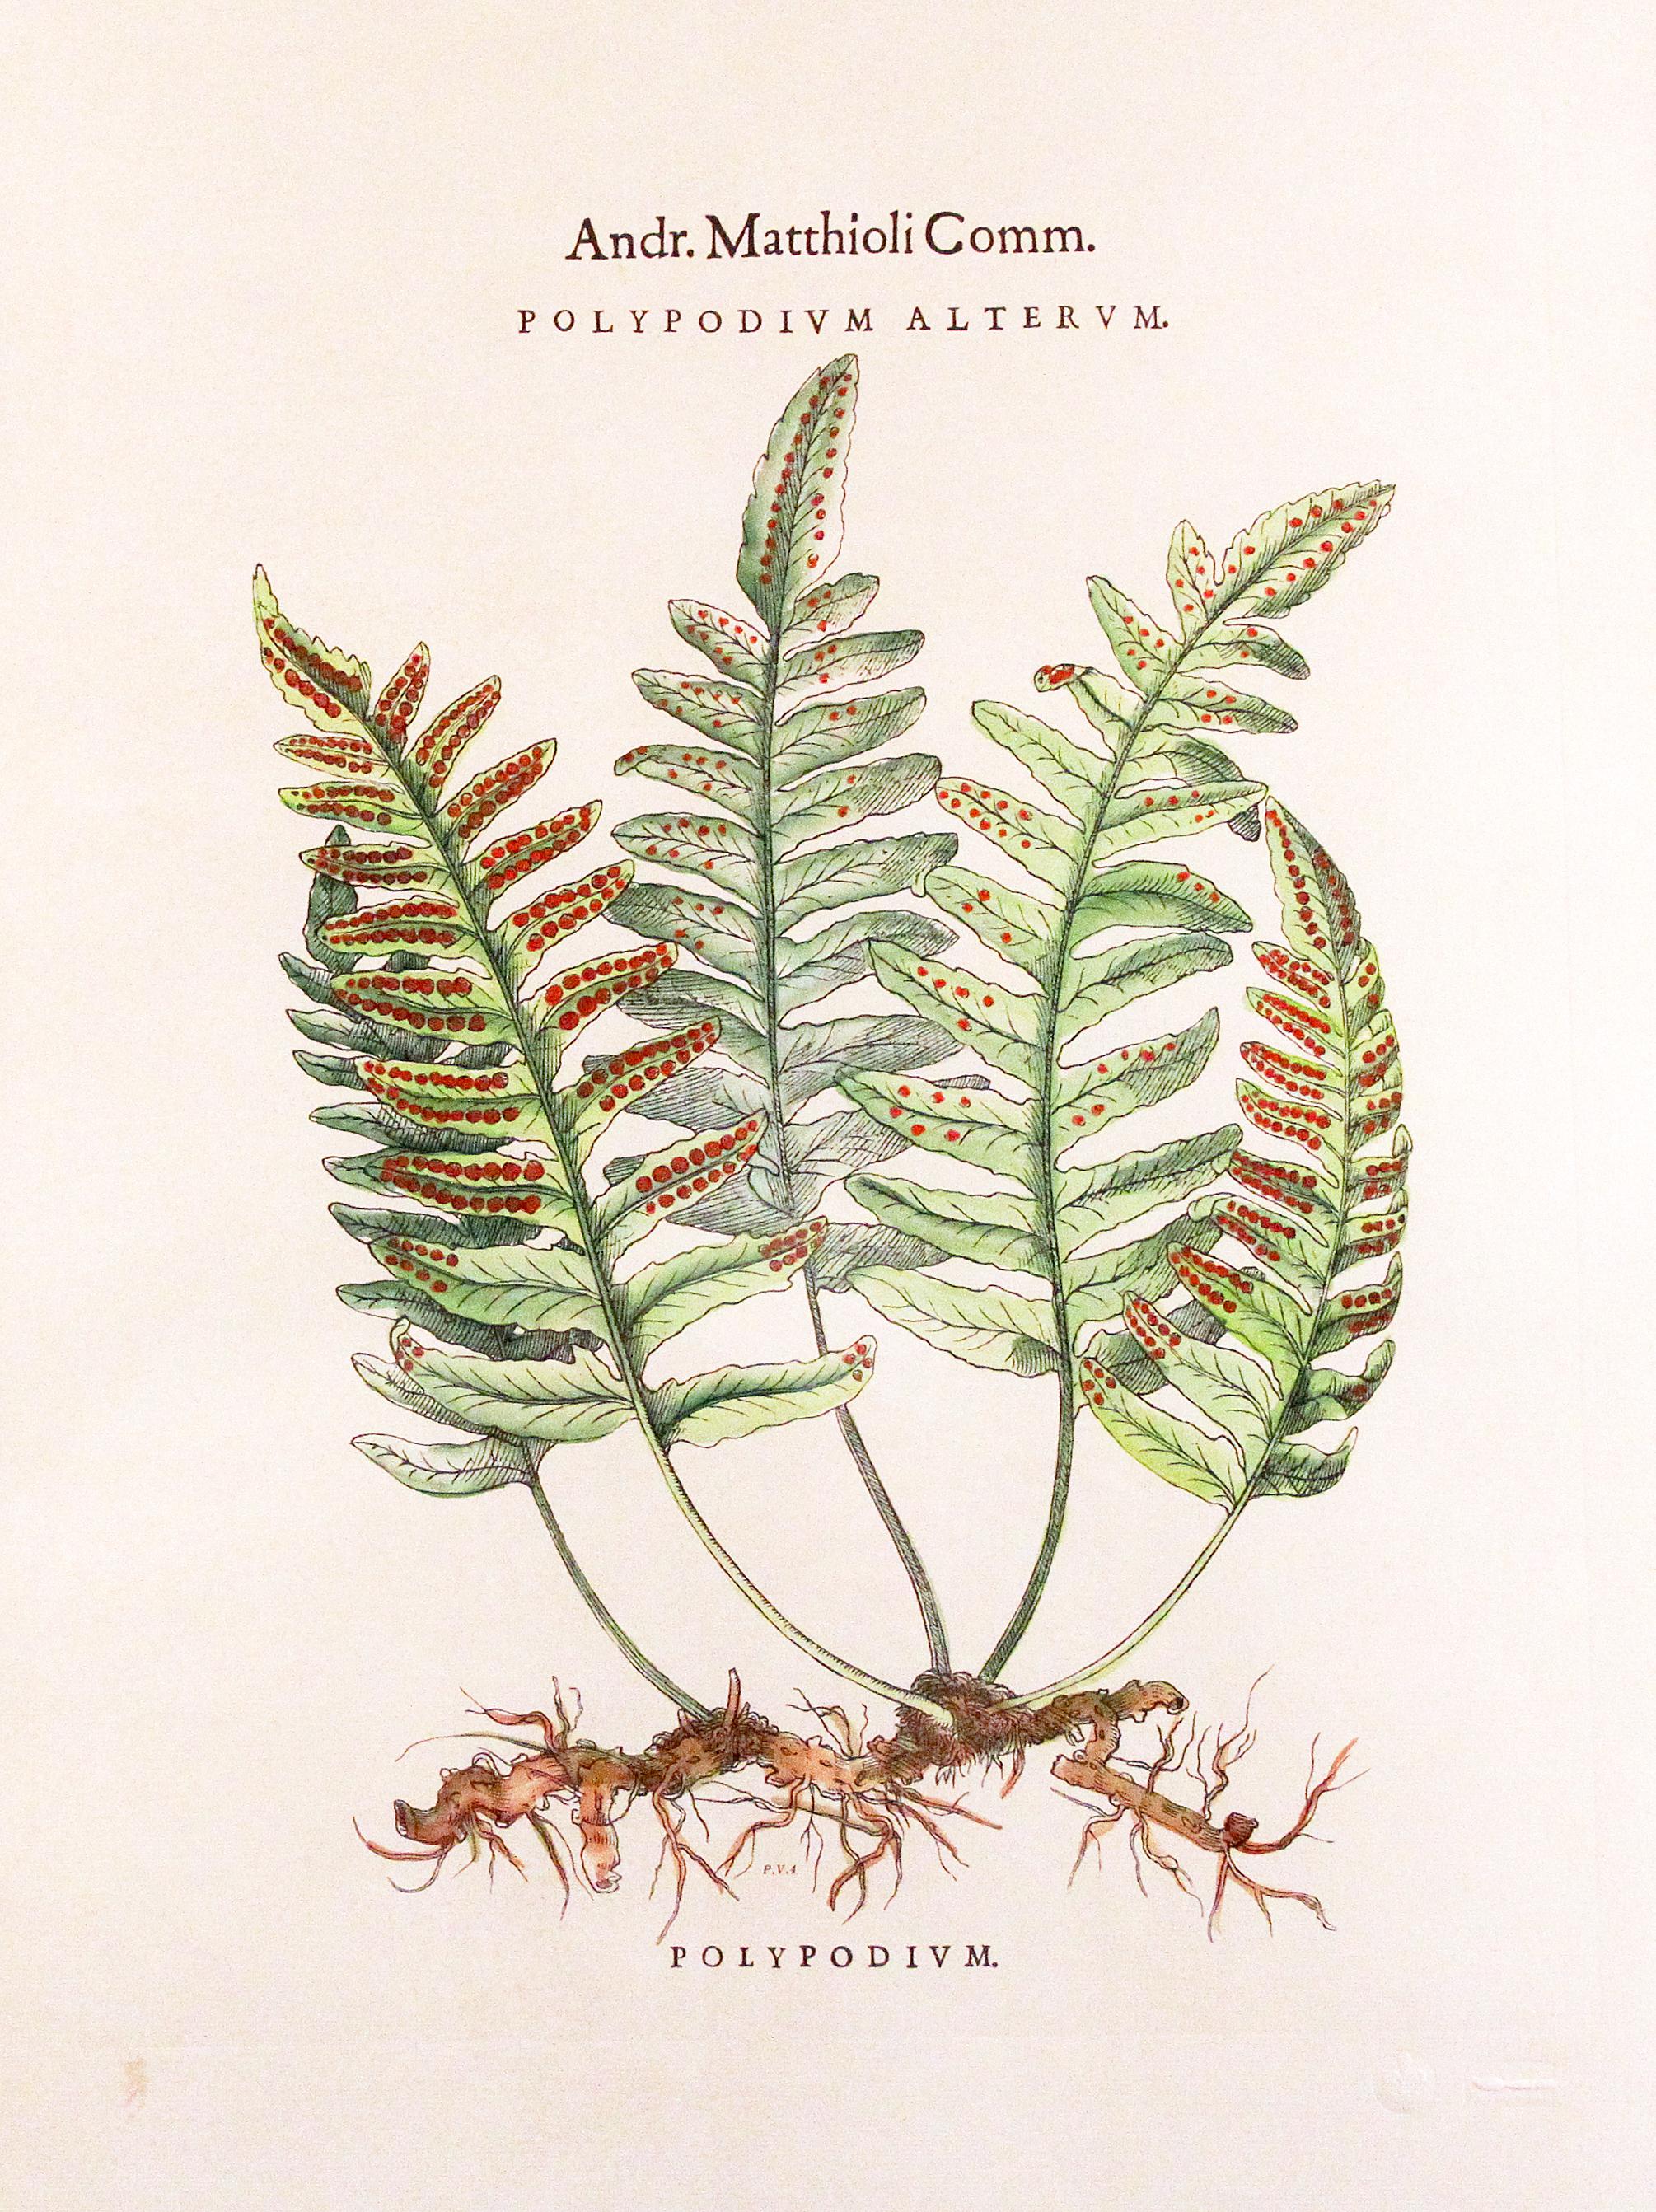 Andr. Matthioli Comm.
Polypodium Alterum Fern print
In gold frame with ivory mat Measures 22 W x 28 H x 1 D.
   